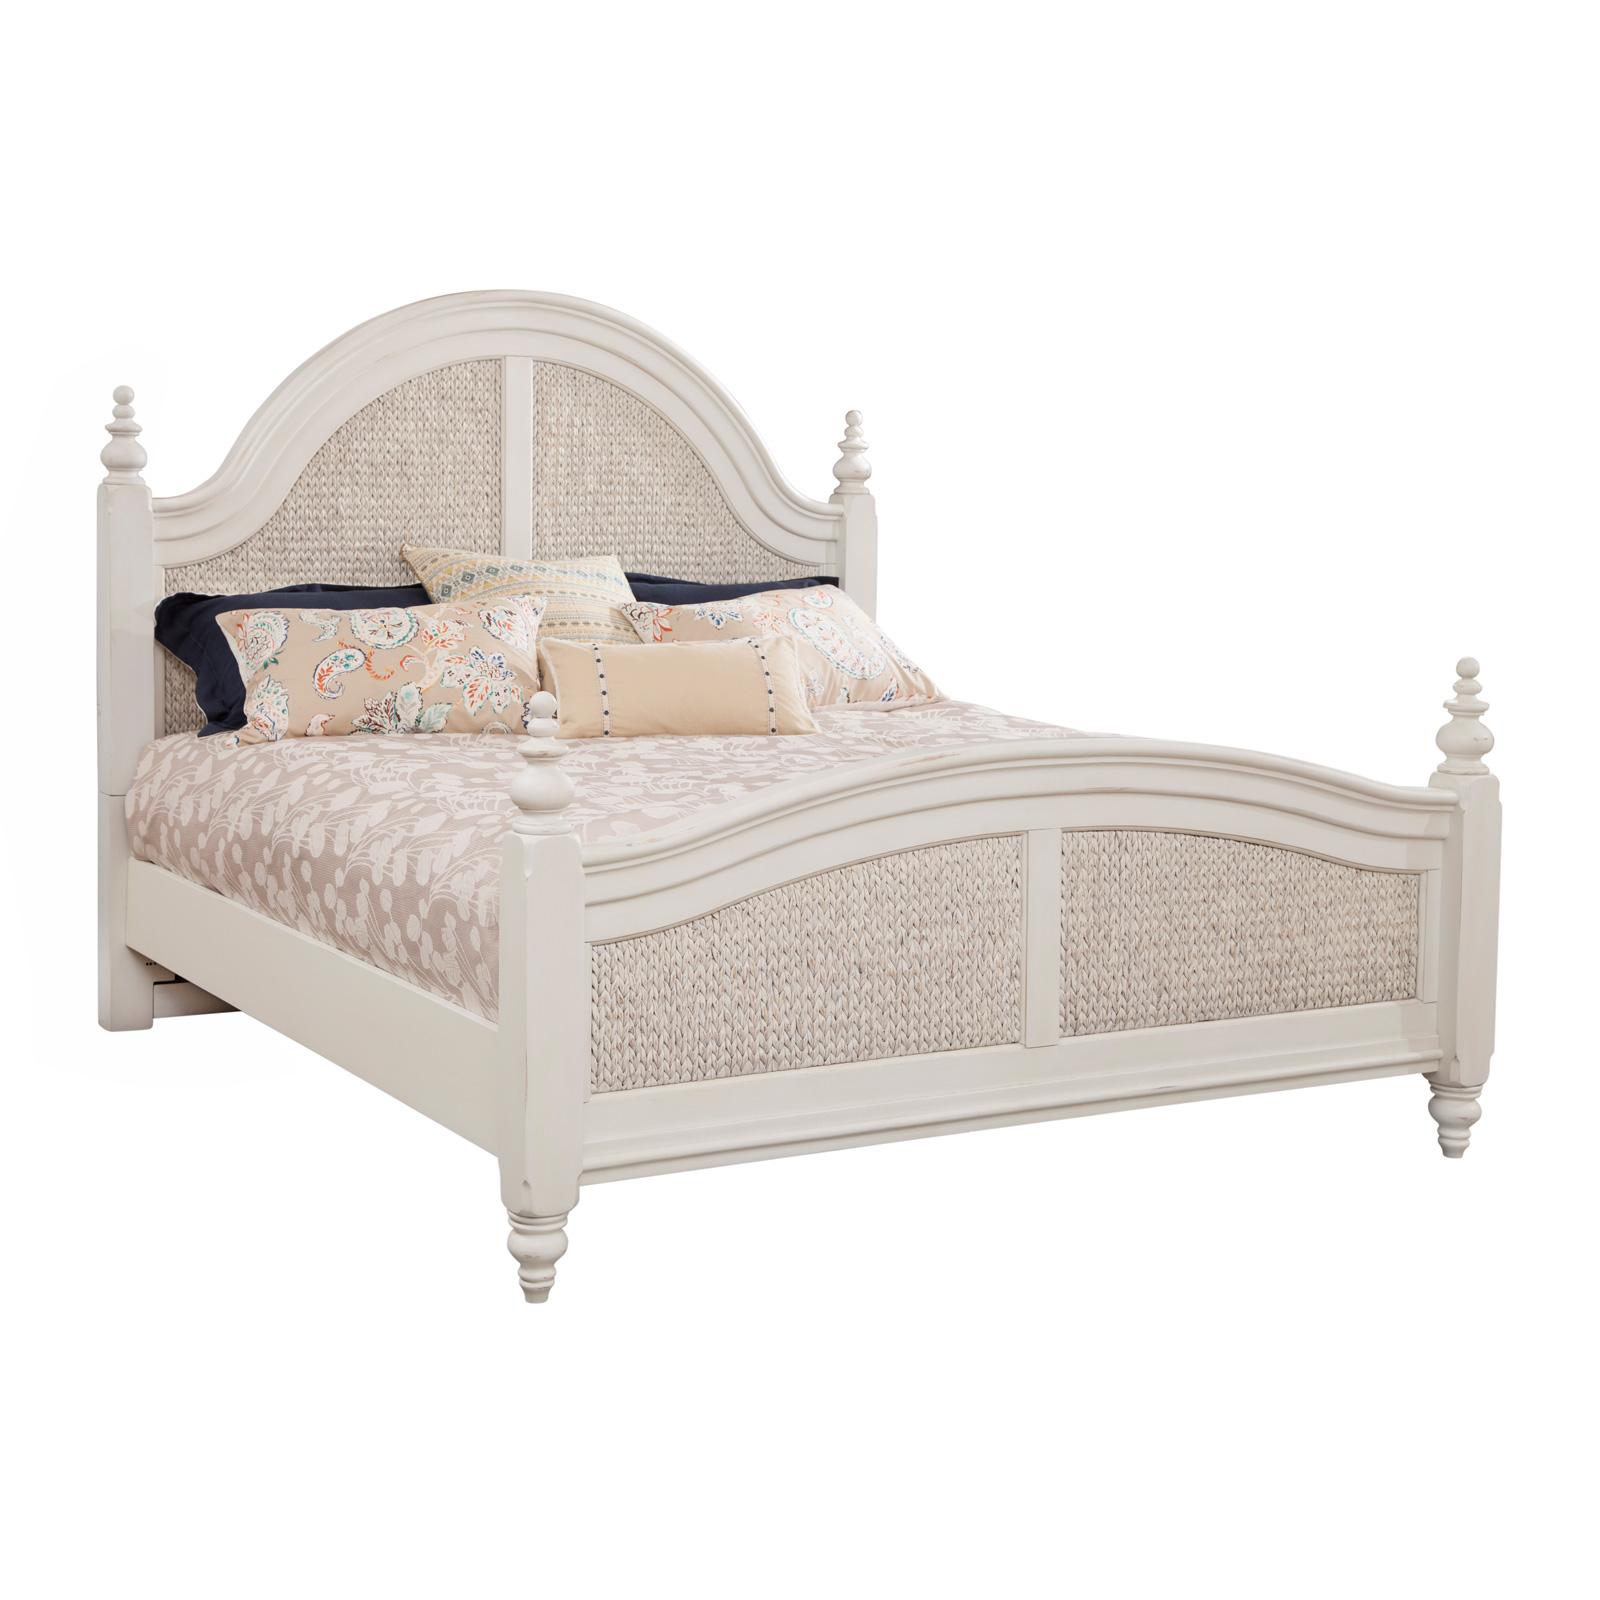 Youth, Traditional, Cottage Panel Bed Rodanthe 3910-66WOWO 3910-66WOWO in White 